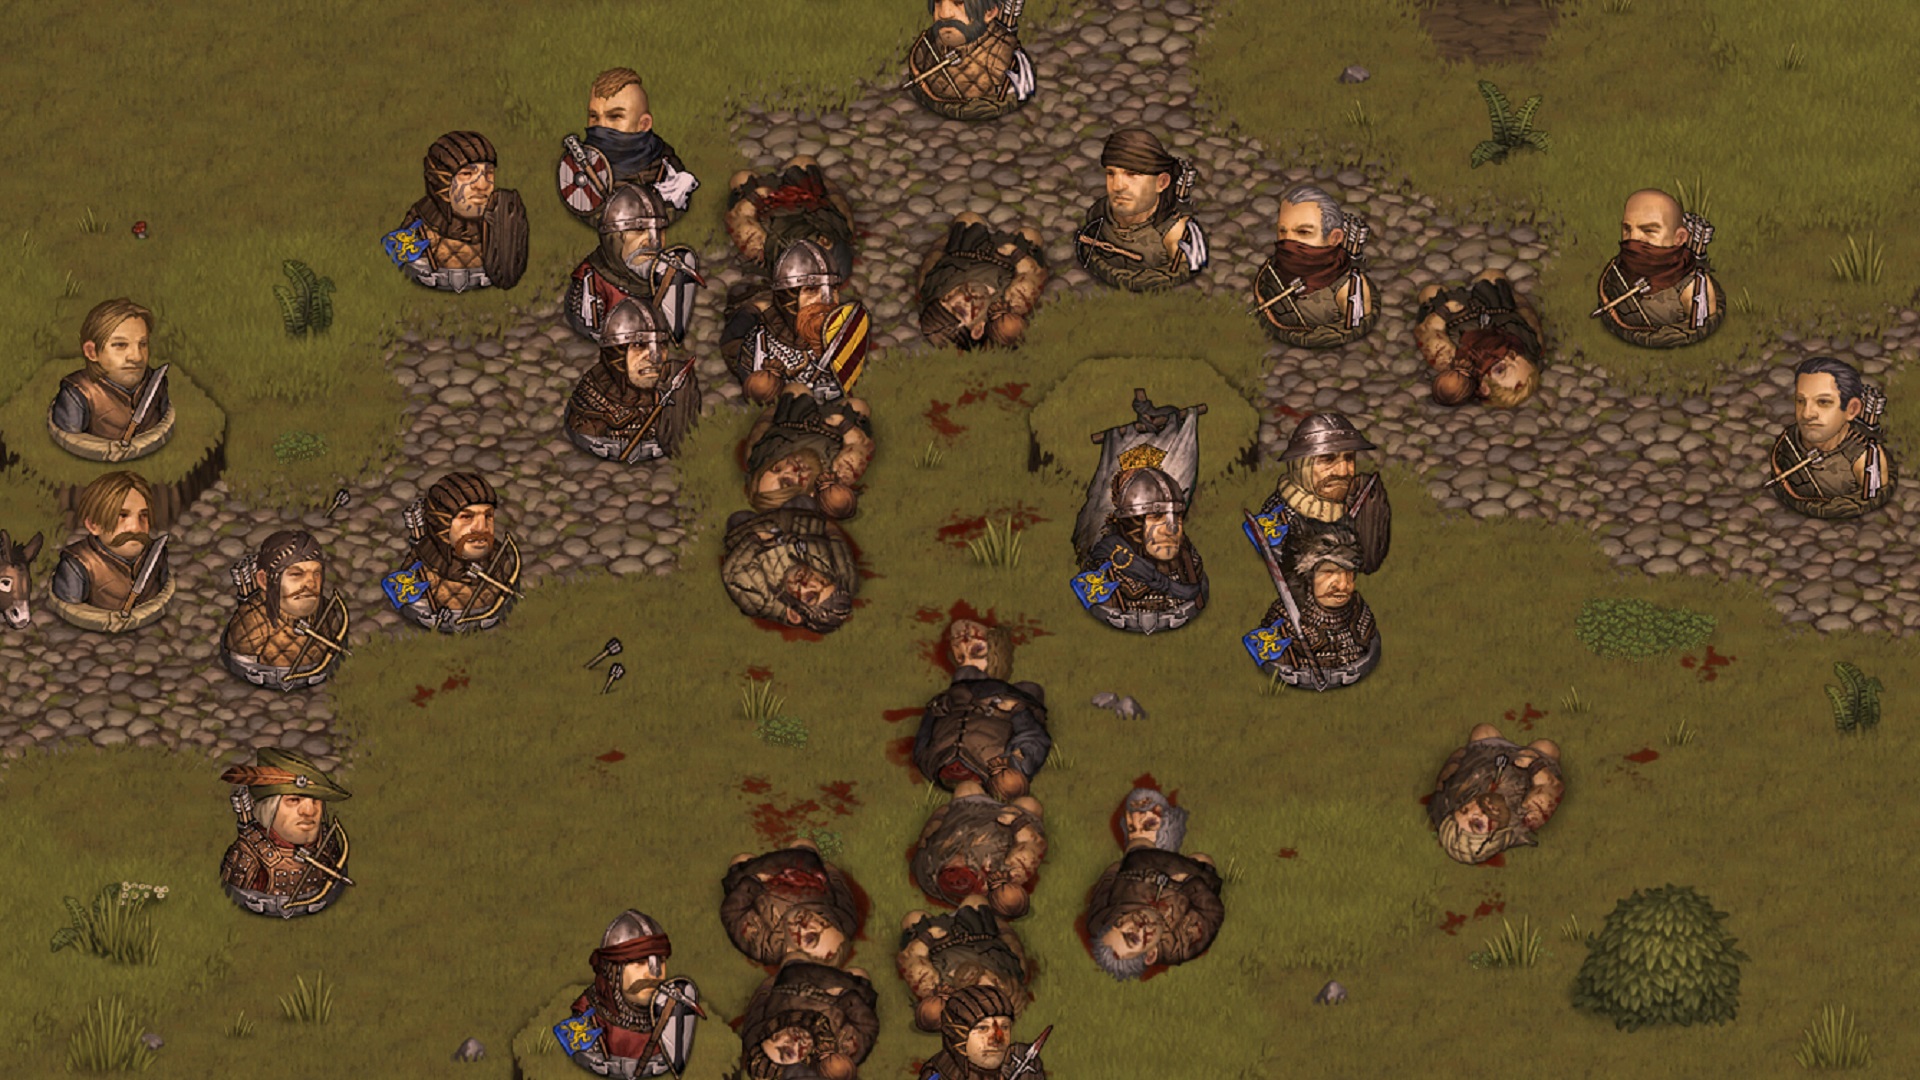 Legends Mod Beta at Battle Brothers Nexus - Mods and Community